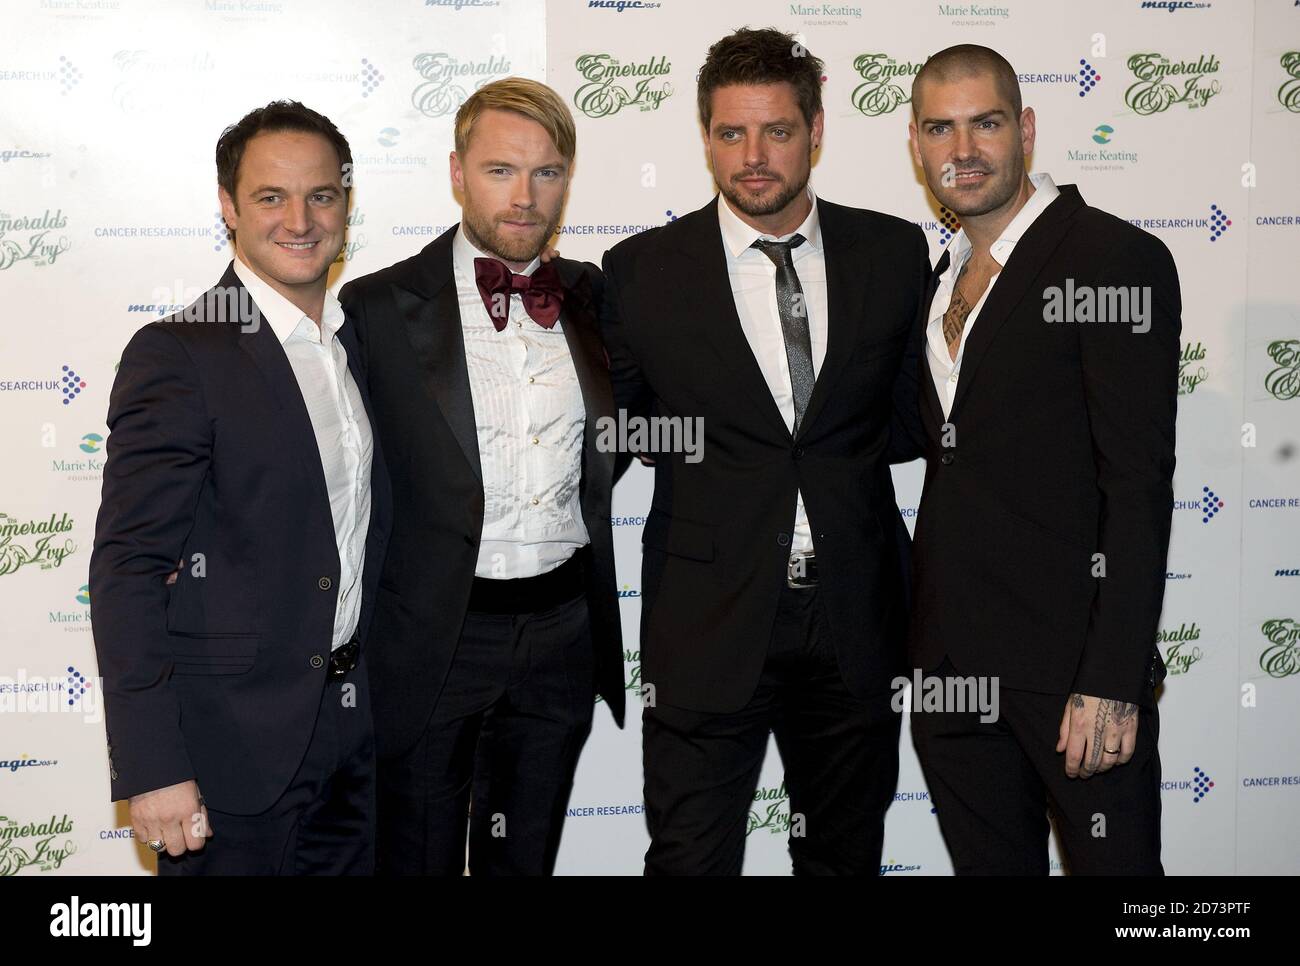 (l-r) Mikey Graham, Ronan Keating, Keith Duffy and Shane Lynch of Boyzone arrive at the Emeralds and Ivy Ball in aid of Cancer Research UK held at Battersea Evolution in south London Stock Photo